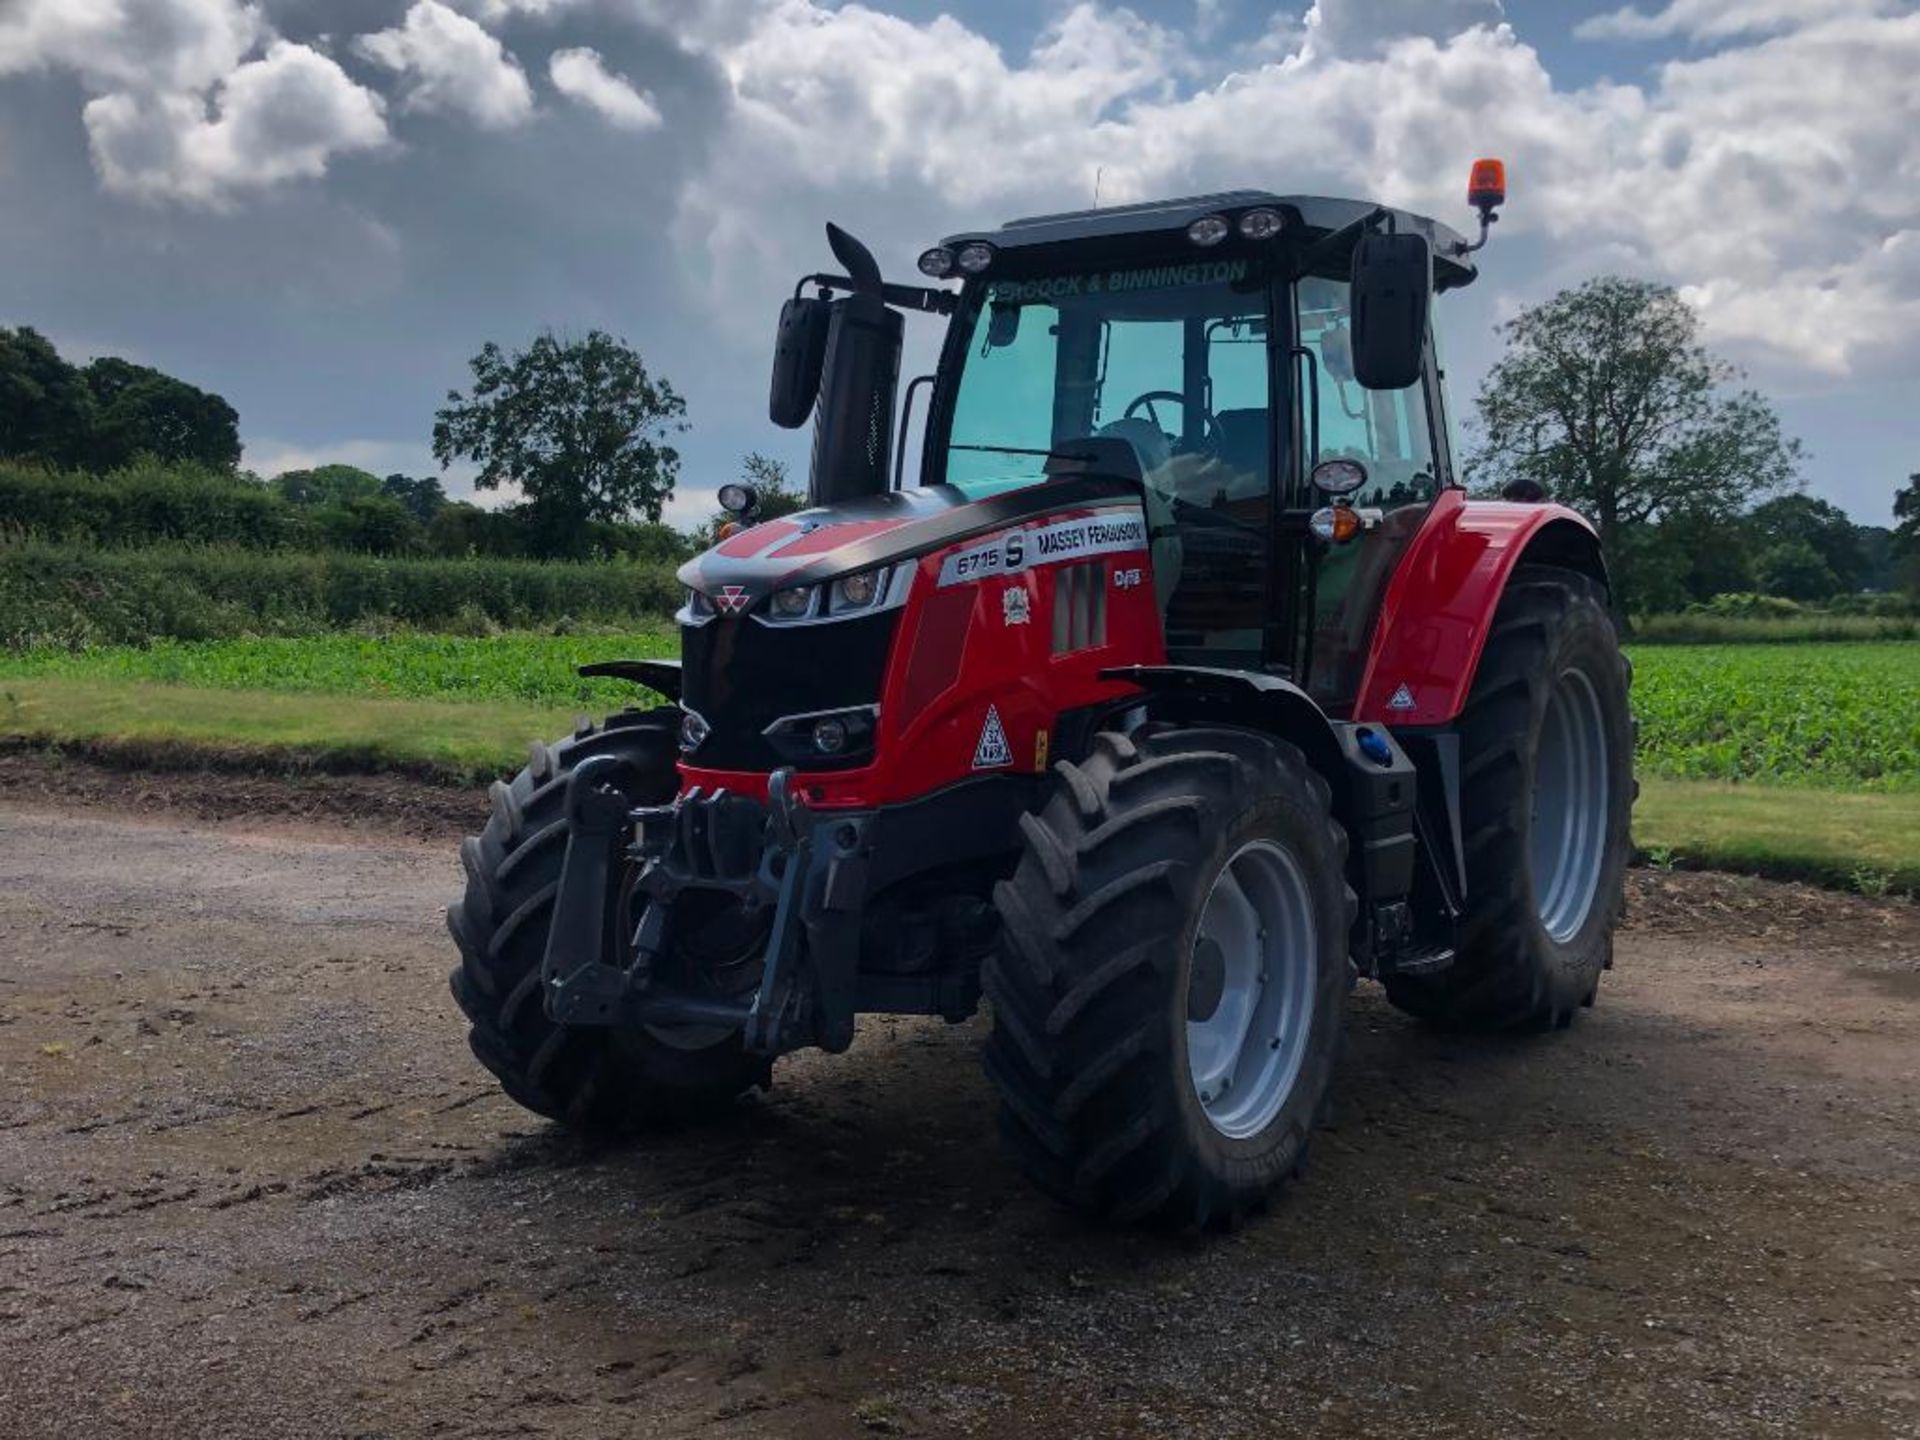 2019 Massey Ferguson 6715 S Dyna 6 50kph 4wd tractor c/w 3 manual spools, front linkage, air brakes, - Image 24 of 41